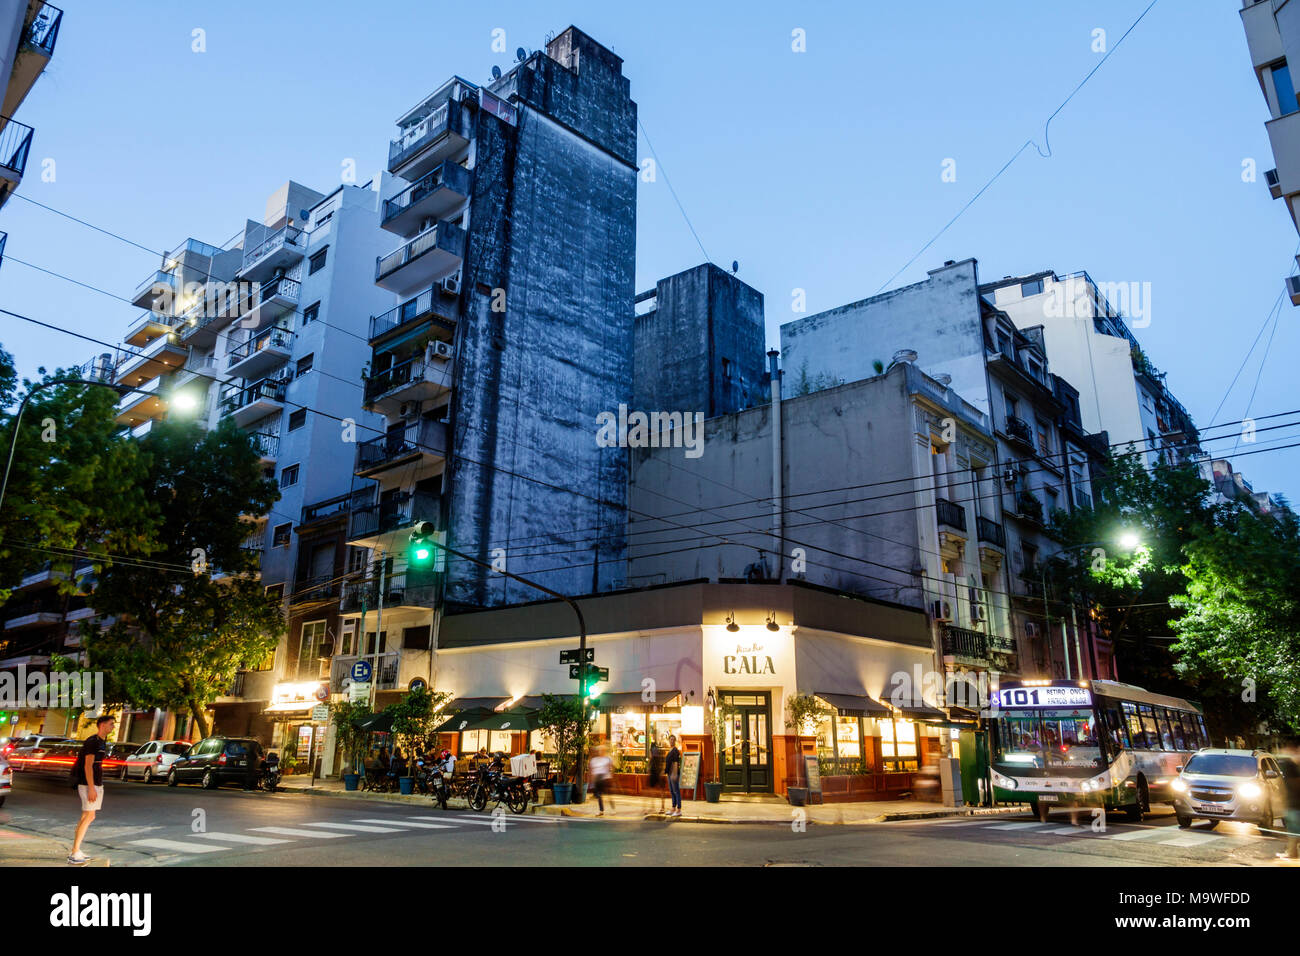 Buenos Aires Argentina,Recoleta,Cala Pizza y Bar Recoleta,restaurant restaurants food dining eating out cafe cafes bistro,evening night nightlife even Stock Photo